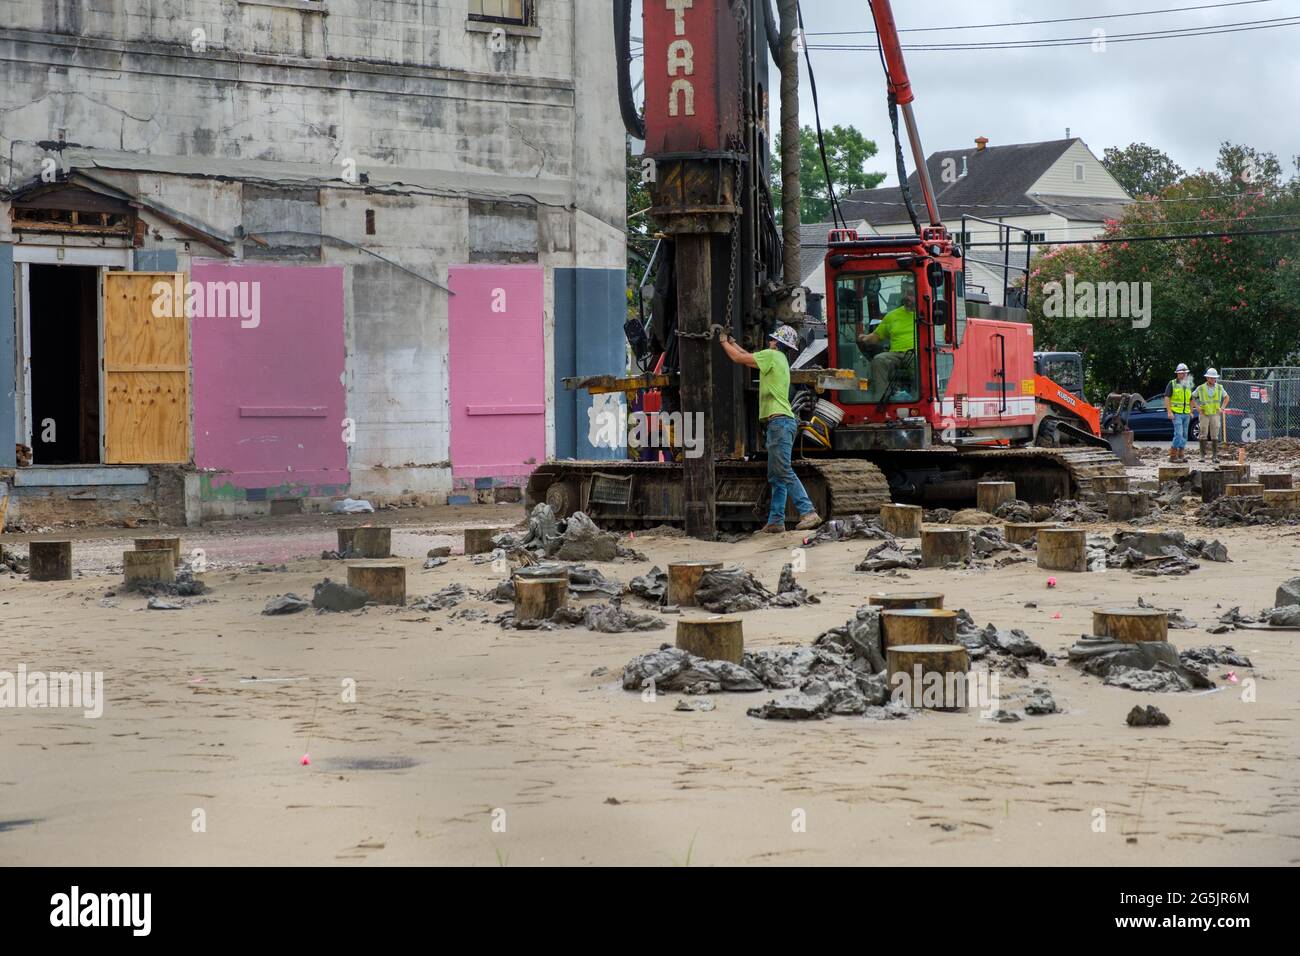 NEW ORLEANS, LA, USA - JUNE 22, 2021: Worker steadies piling for Industrial pile driver on Uptown construction site Stock Photo